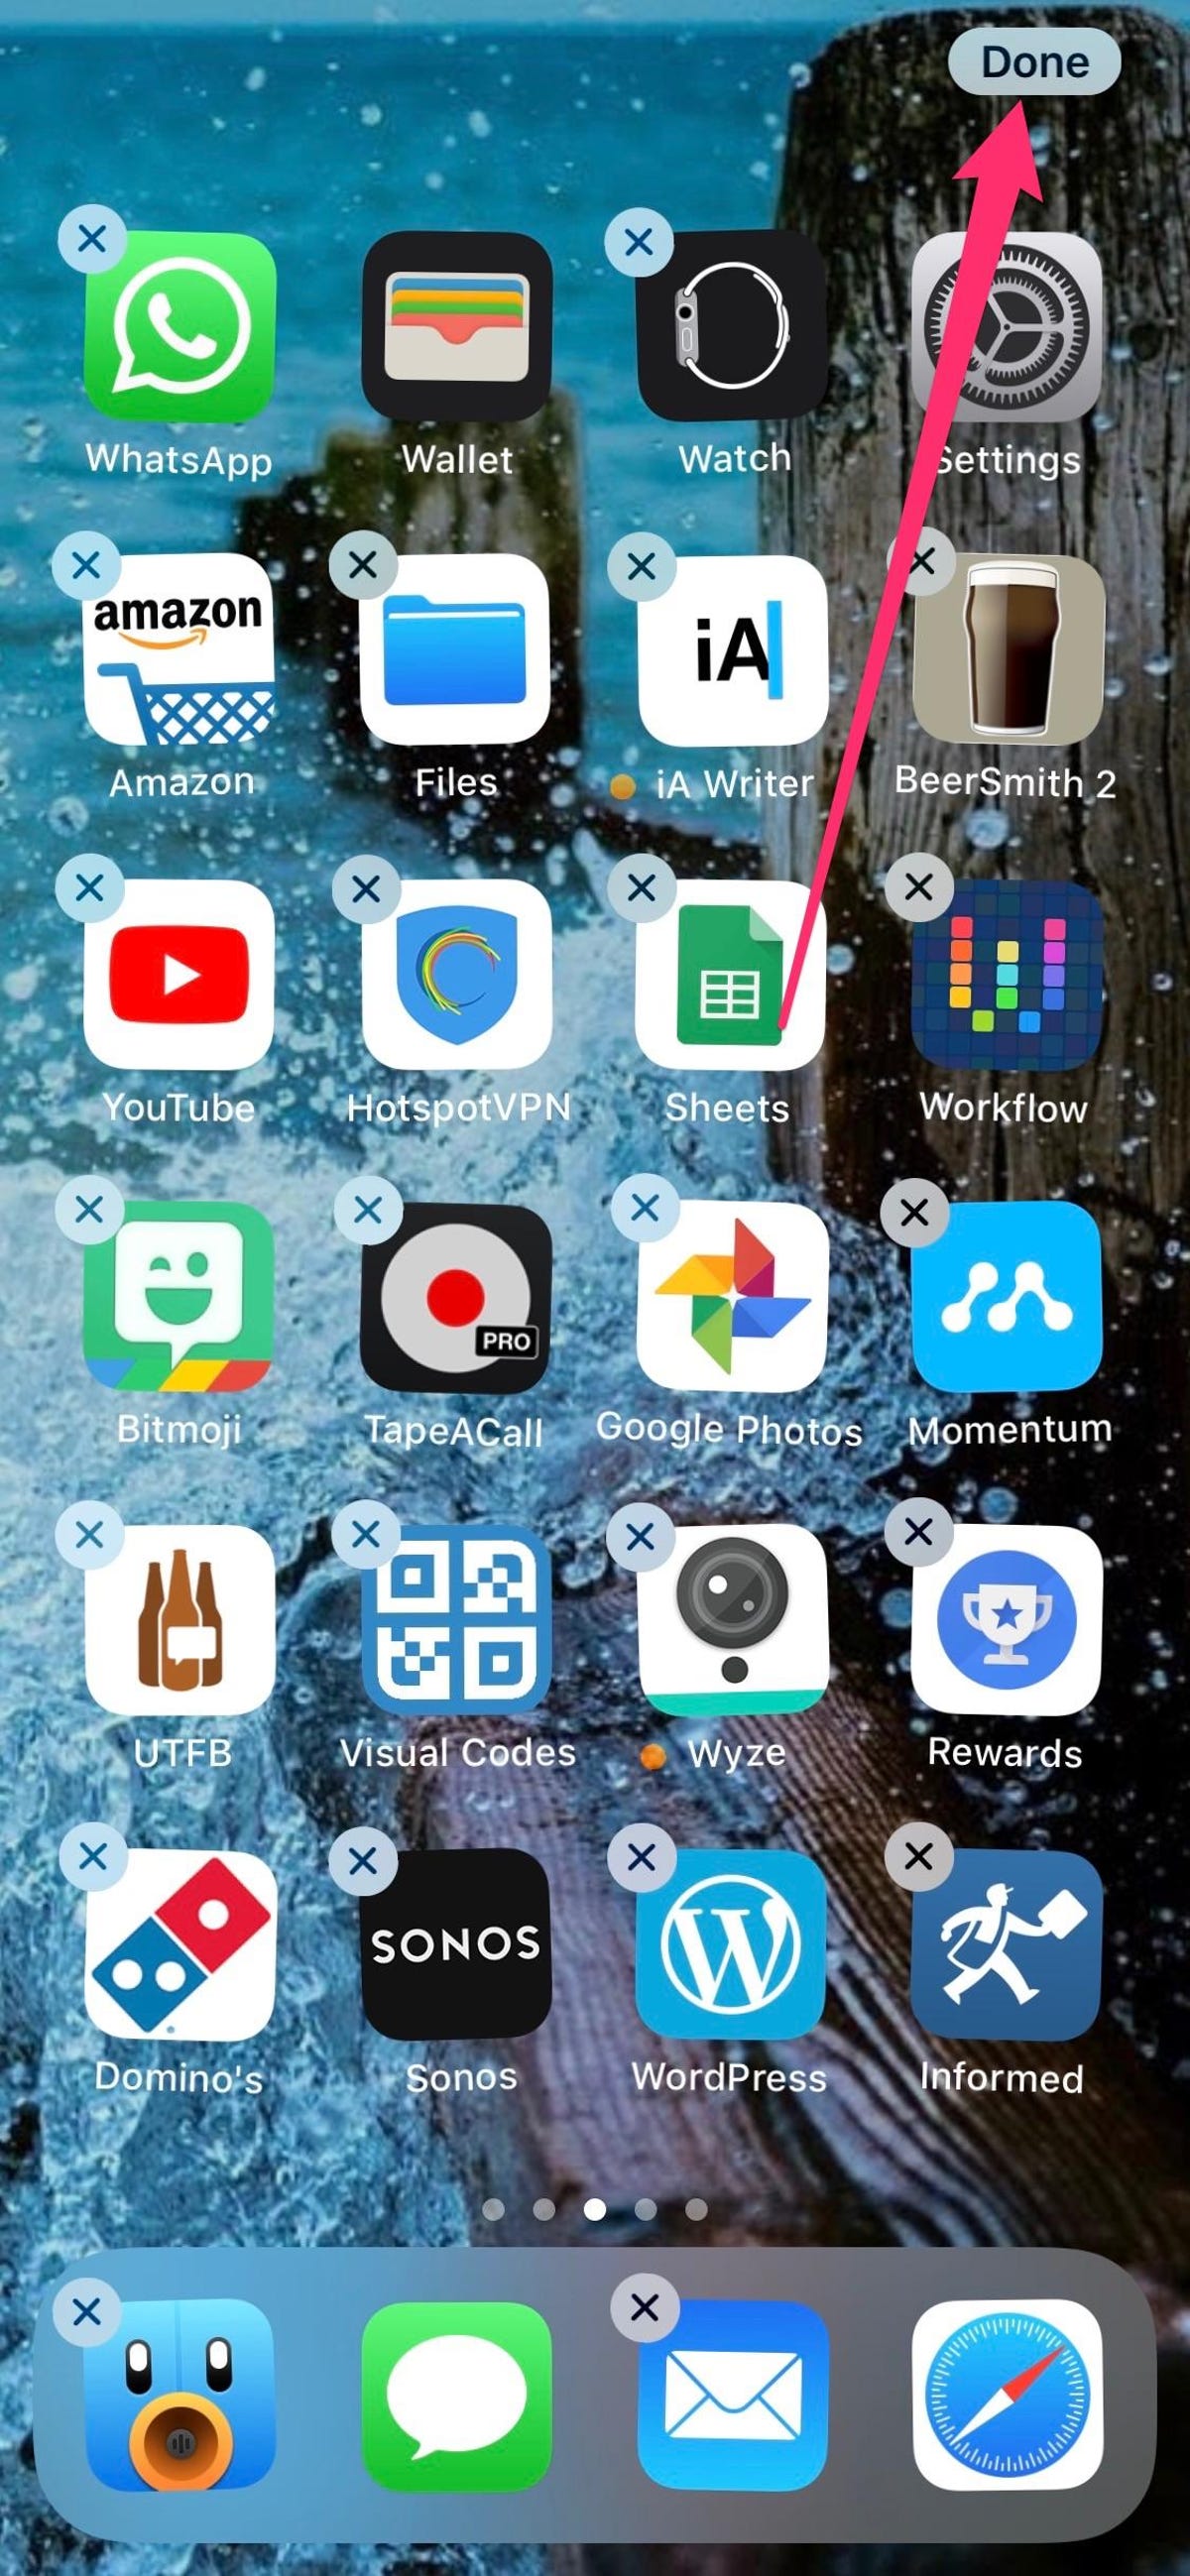 iphone-x-done-moving-apps